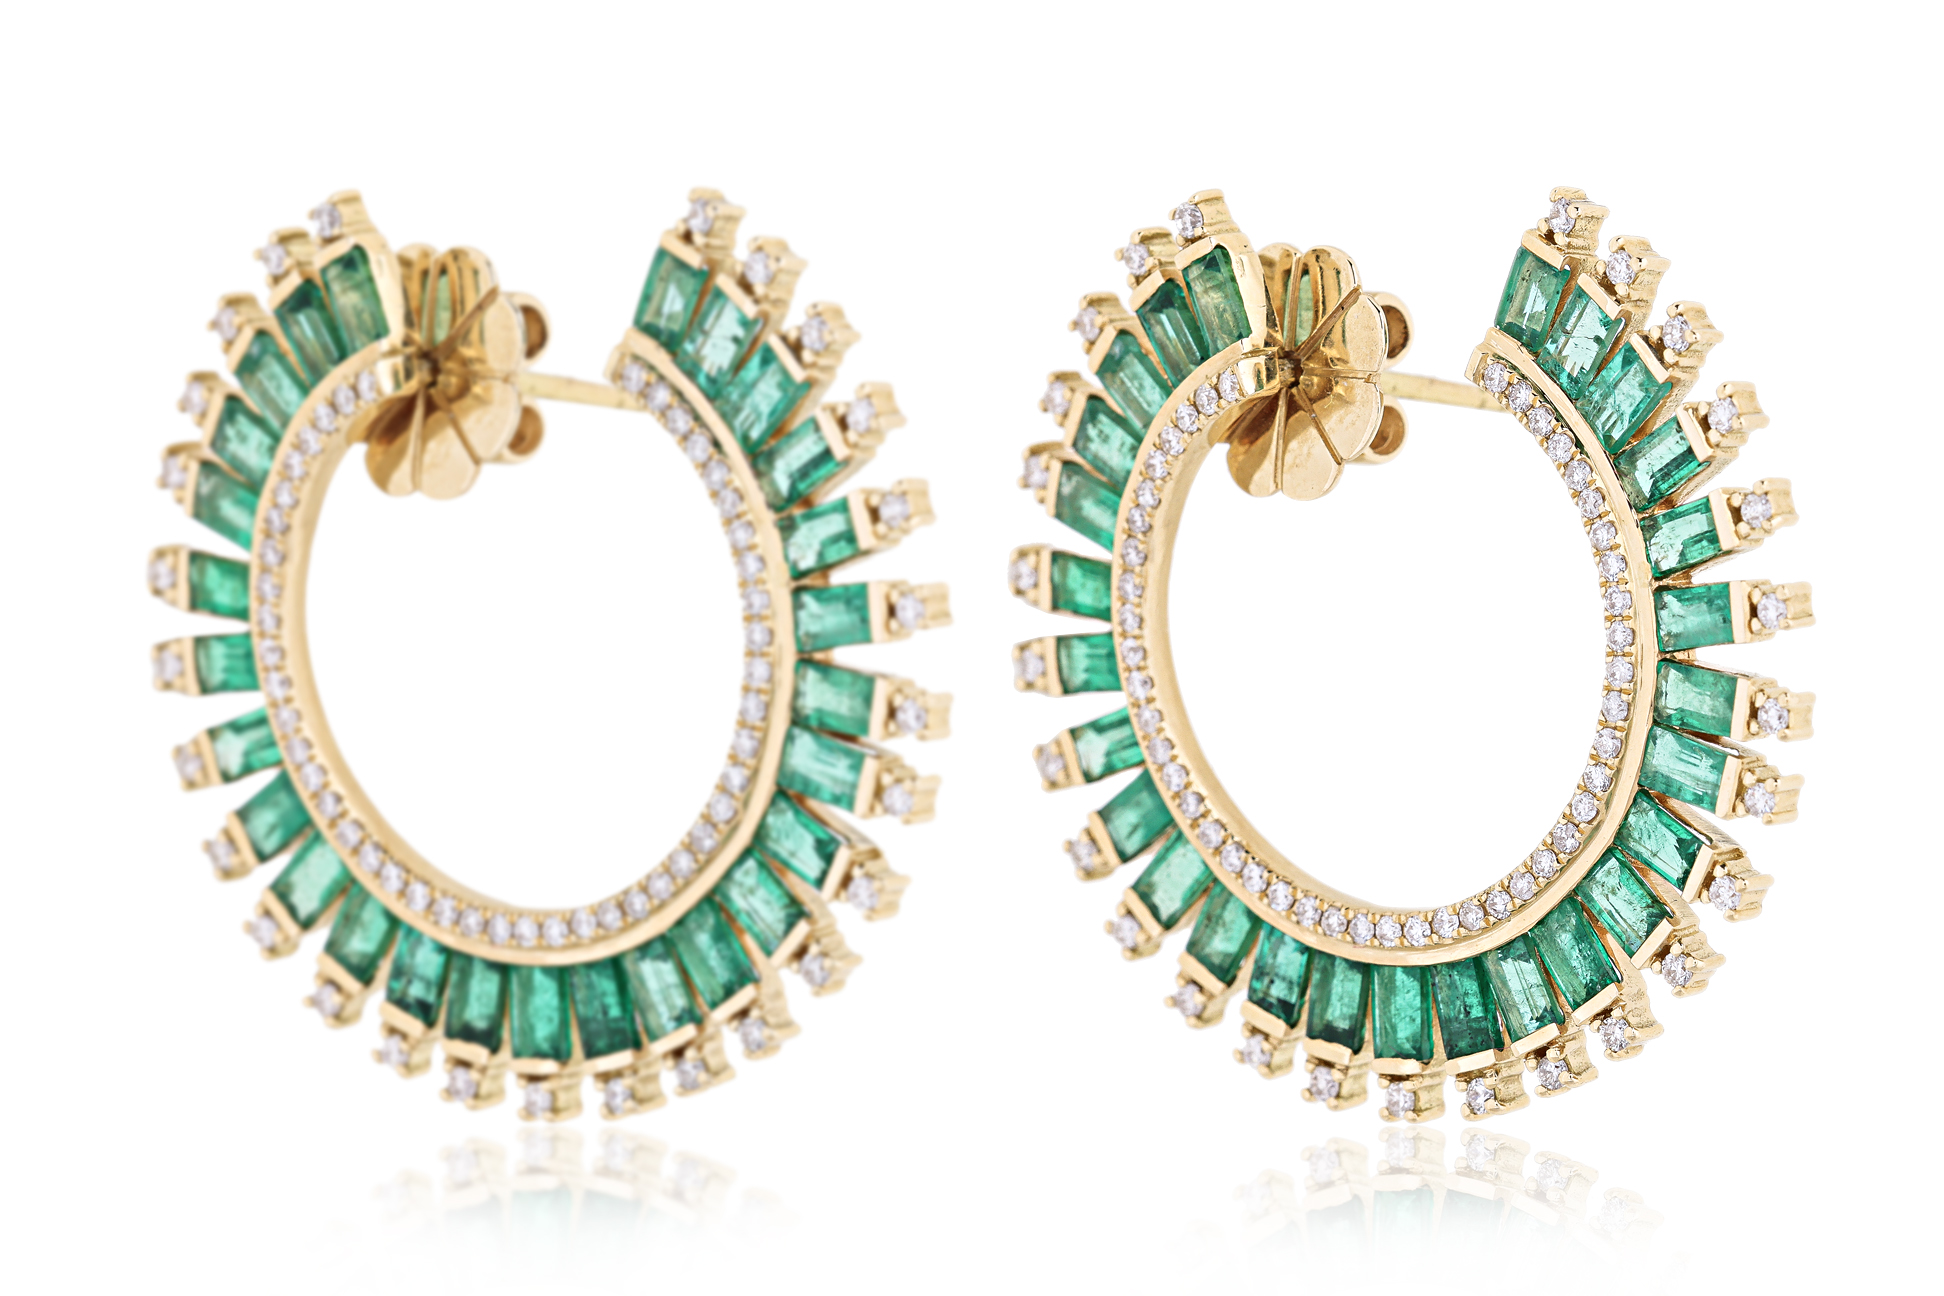 A PAIR OF EMERALD AND DIAMOND EARRINGS - Image 2 of 4